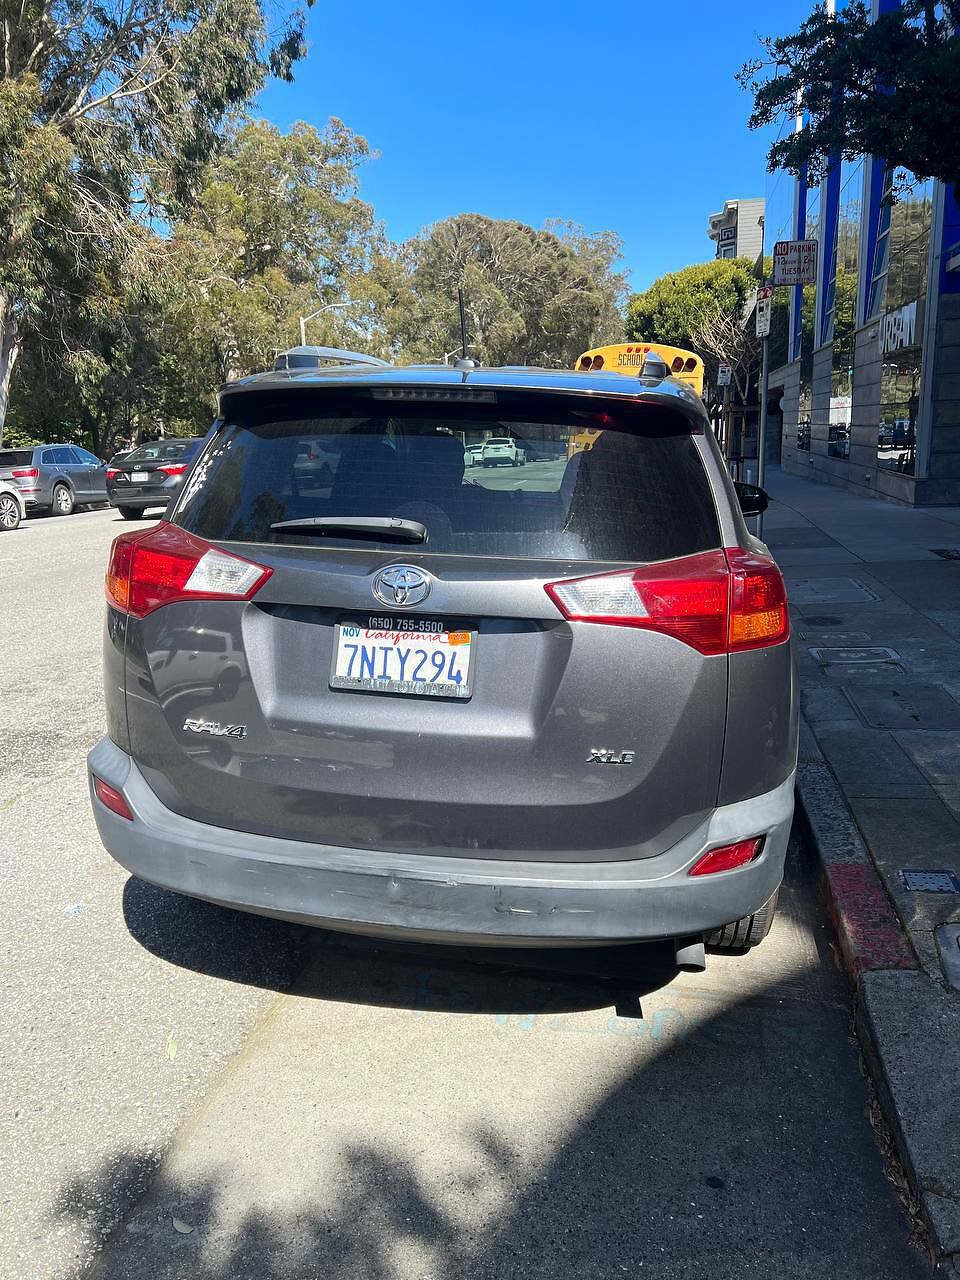 Photo of car in the street with license plate 7NIY294 in California